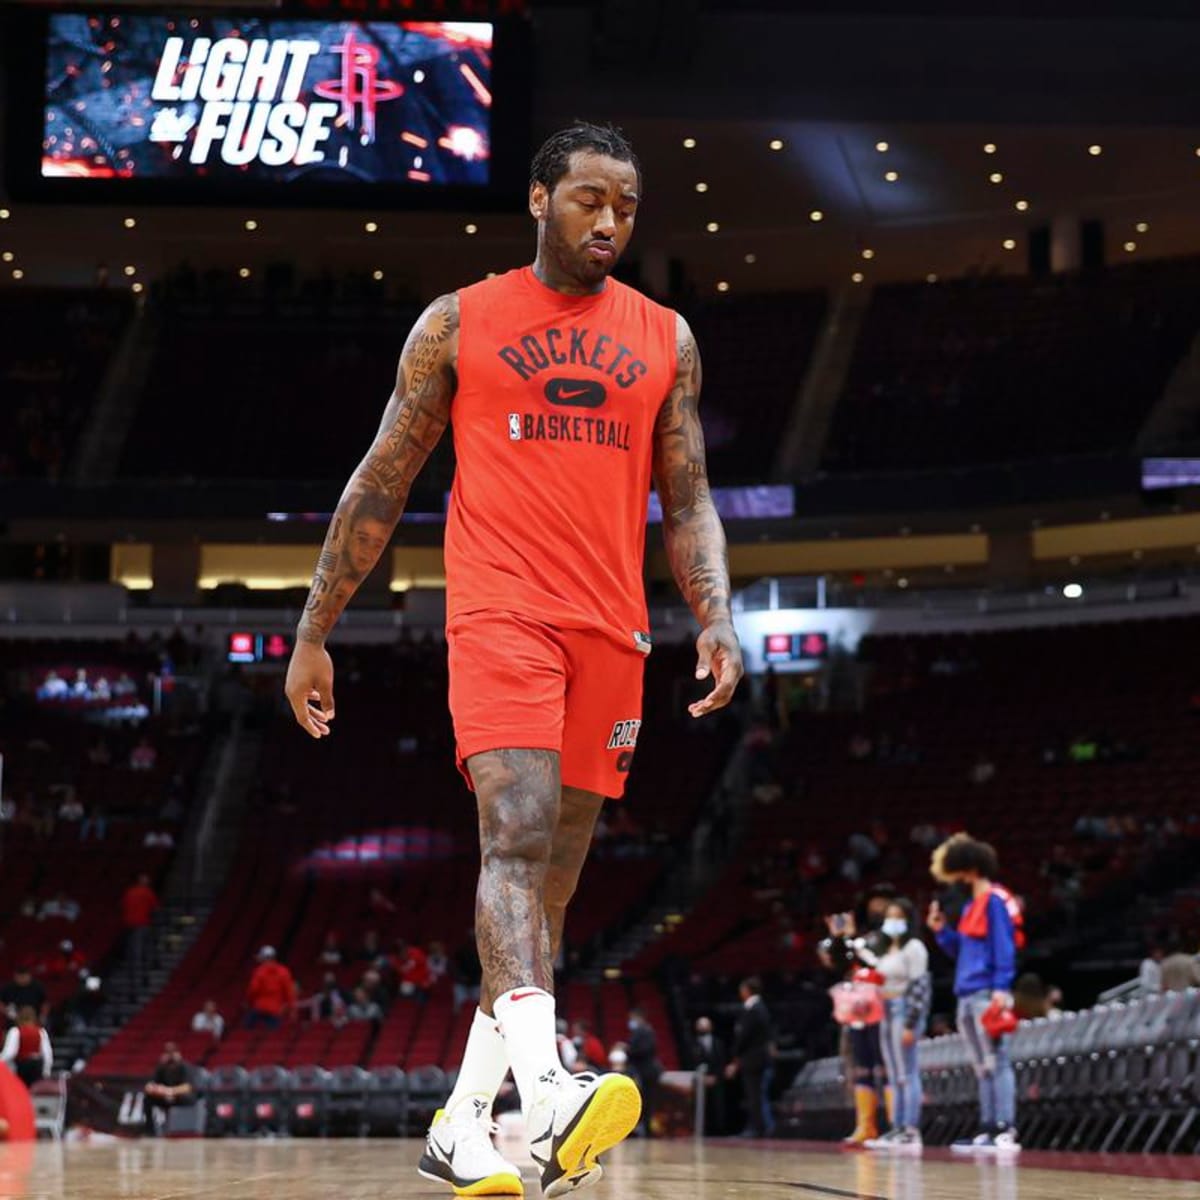 John Wall To Sign With Los Angeles Clippers Following Houston Rockets  Buy-Out? - Sports Illustrated Houston Rockets News, Analysis and More